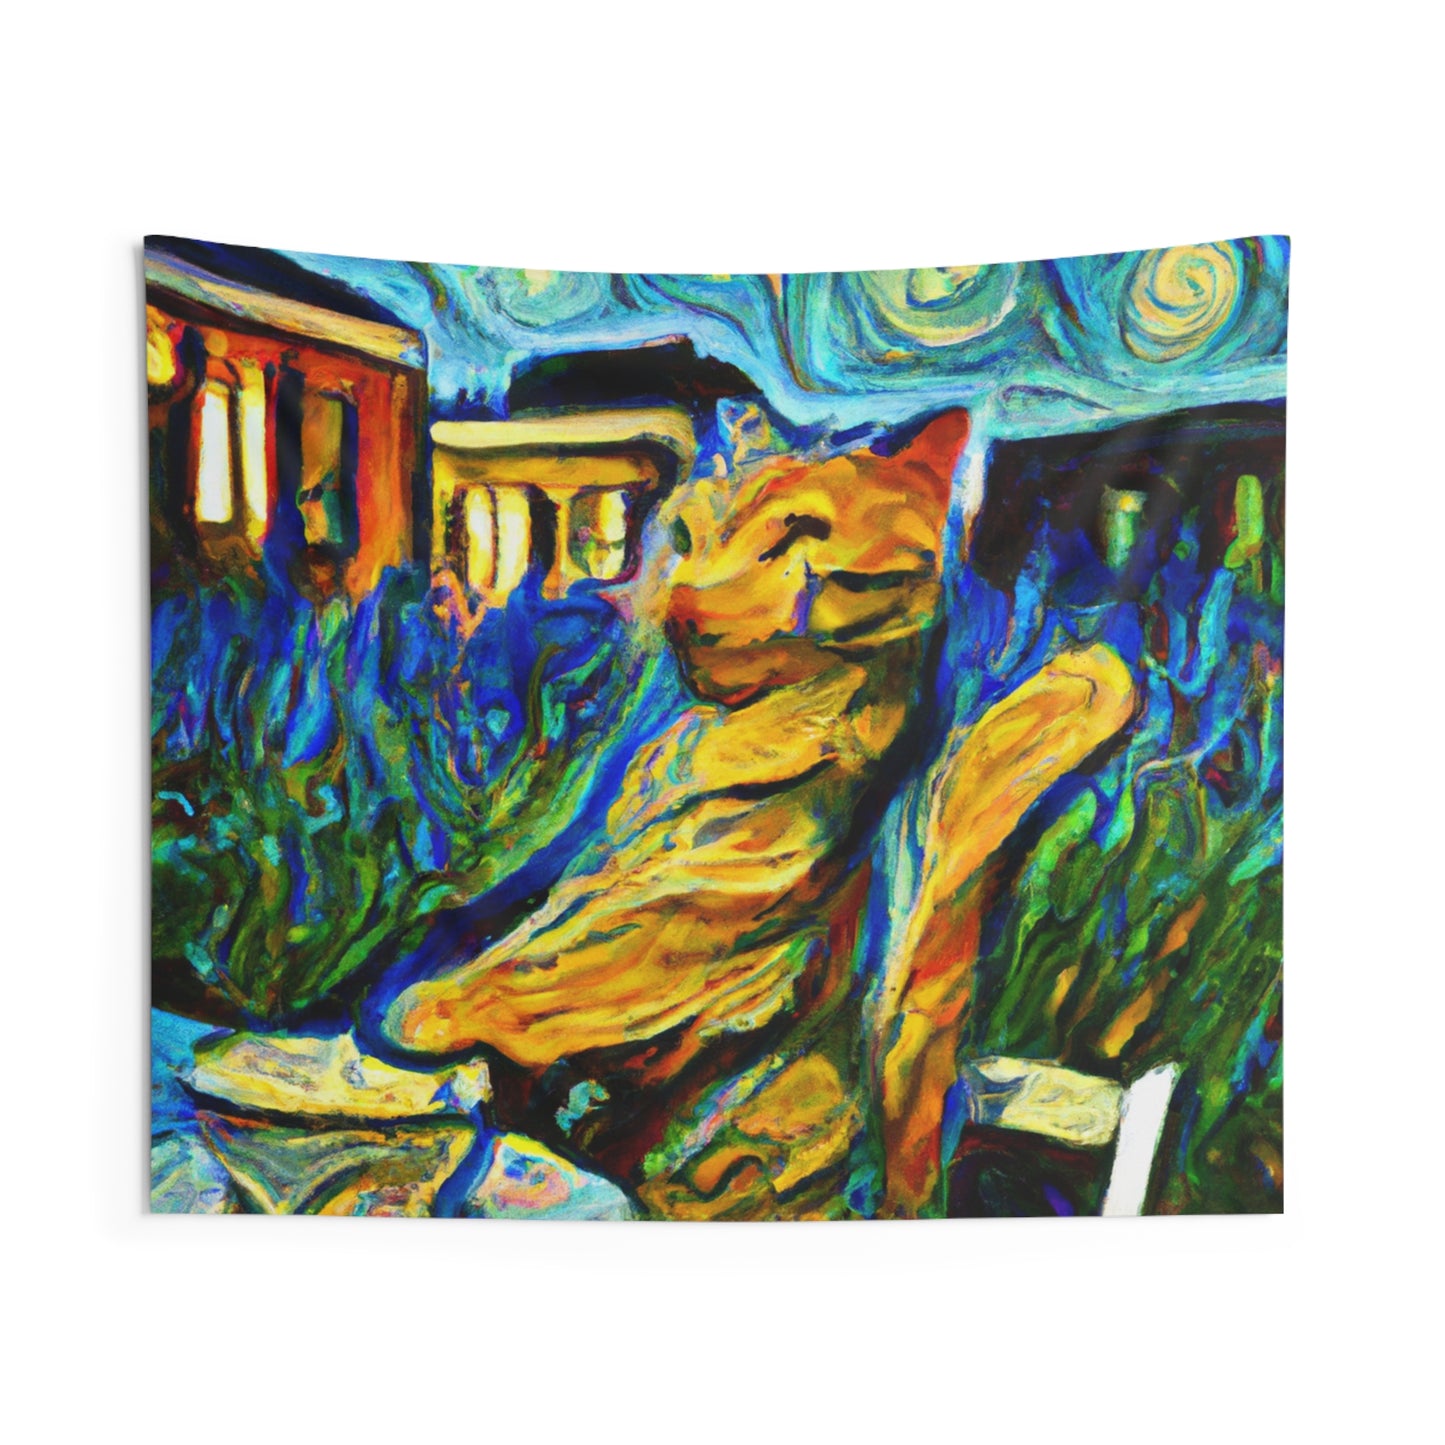 "A Cat Amongst the Celestial Tea Leaves" - The Alien Wall Tapestries